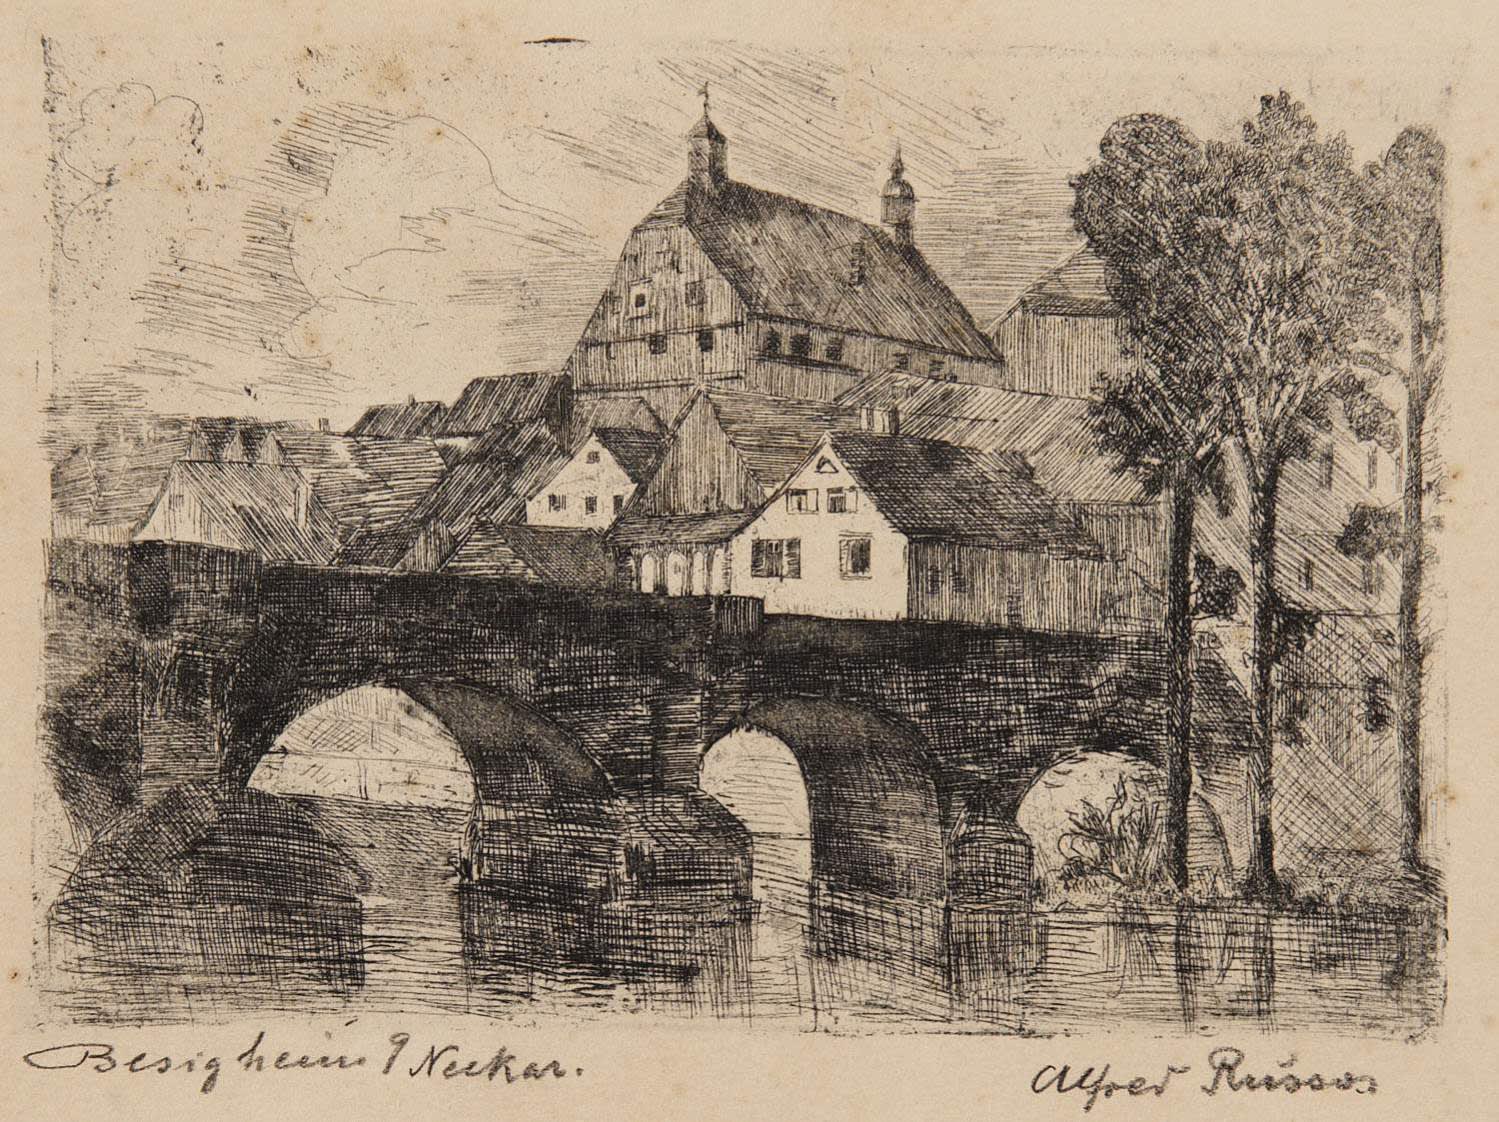 Alfred Russo (1868-1959) Besingheim Neckar n.d. Etching on paper 9.5 x 15 cm Ben Uri Collection © Alfred Russo estate To see and discover more about this artist click here